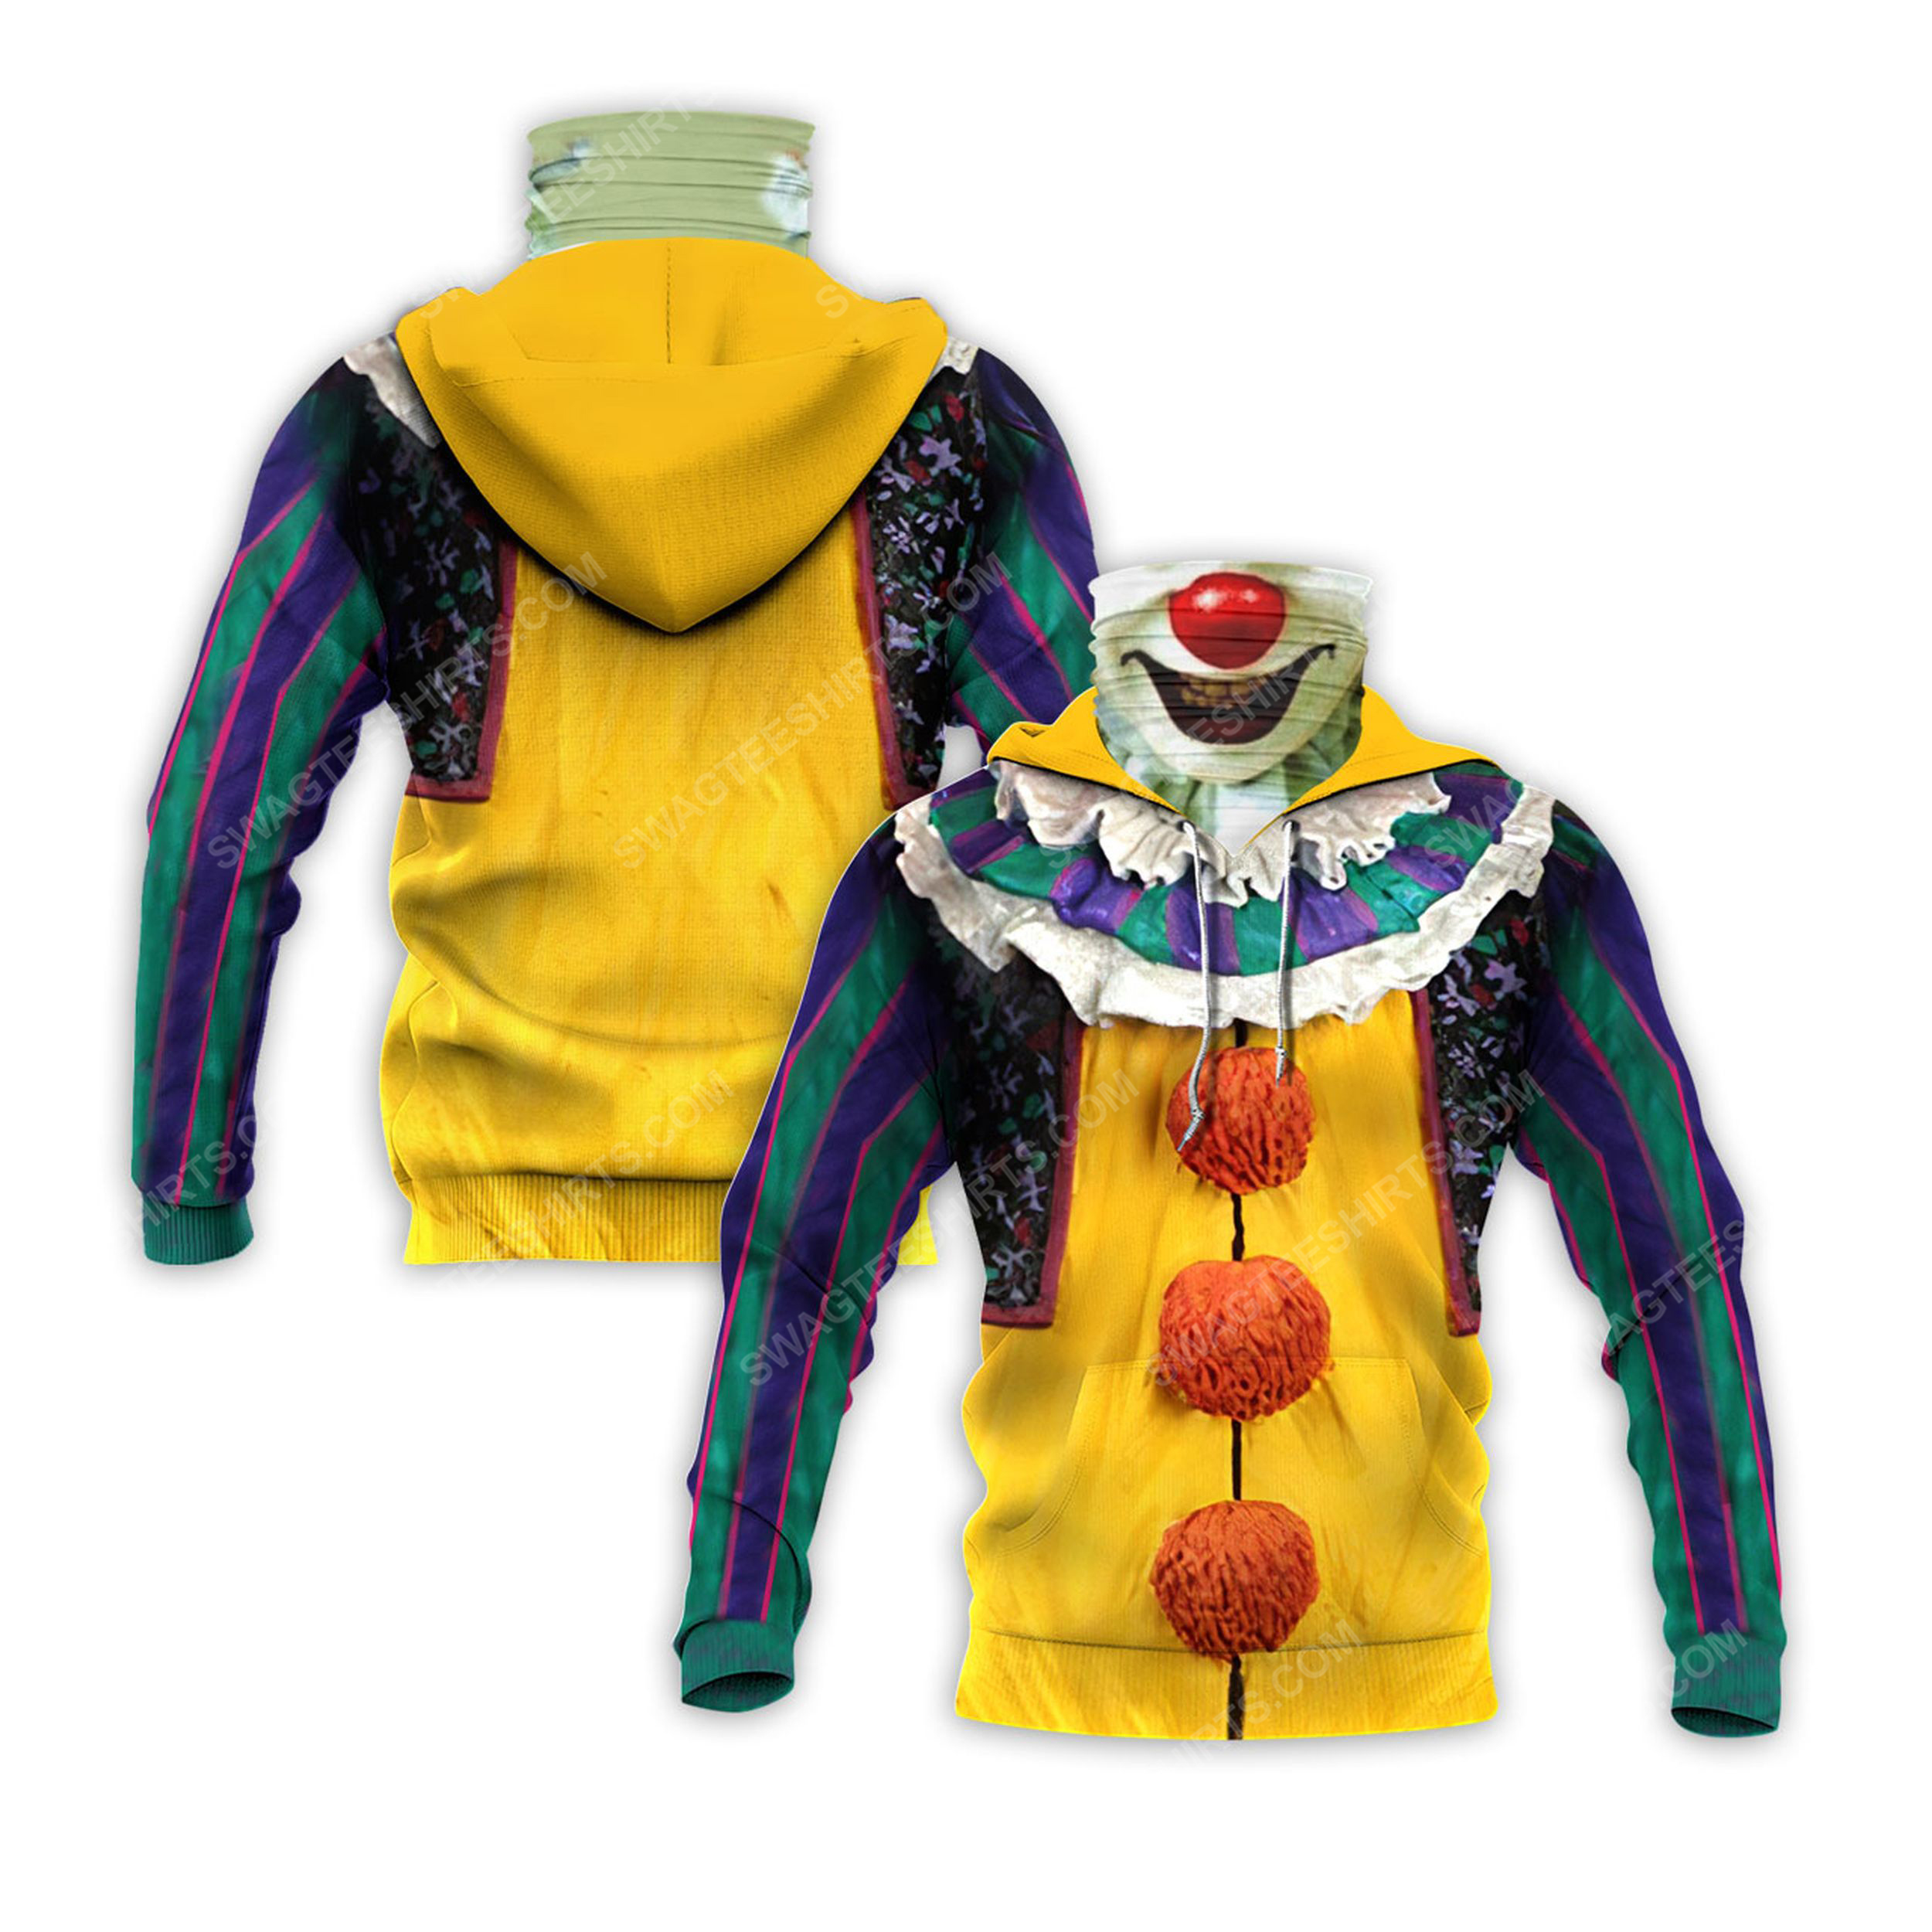 Pennywise the dancing clown for halloween full print mask hoodie 1(1)